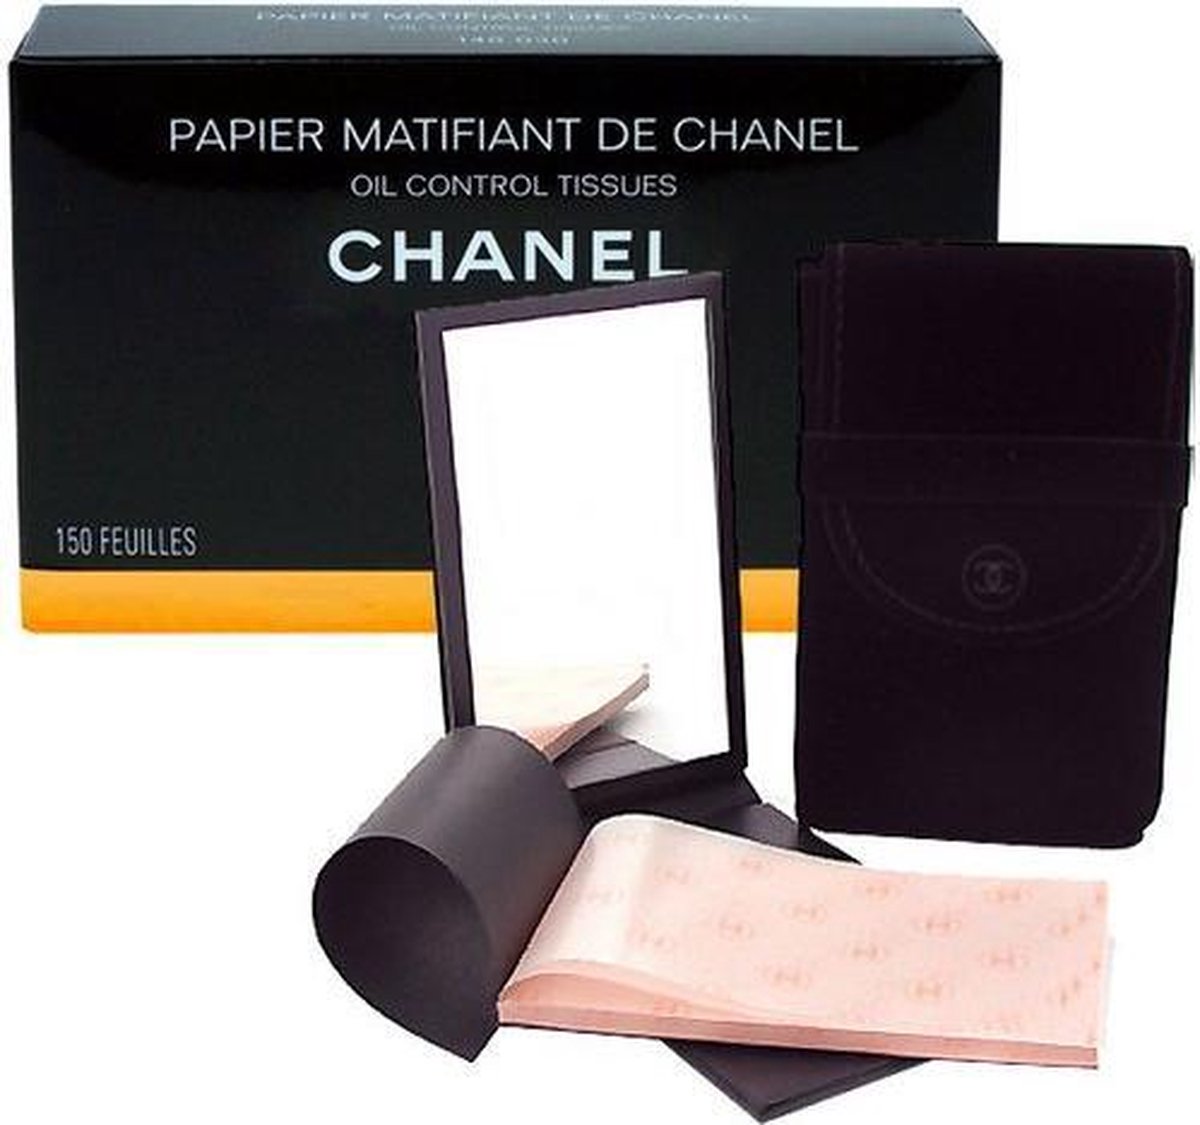 Chanel Oil Control Tissues blotting paper - 150 Sheets